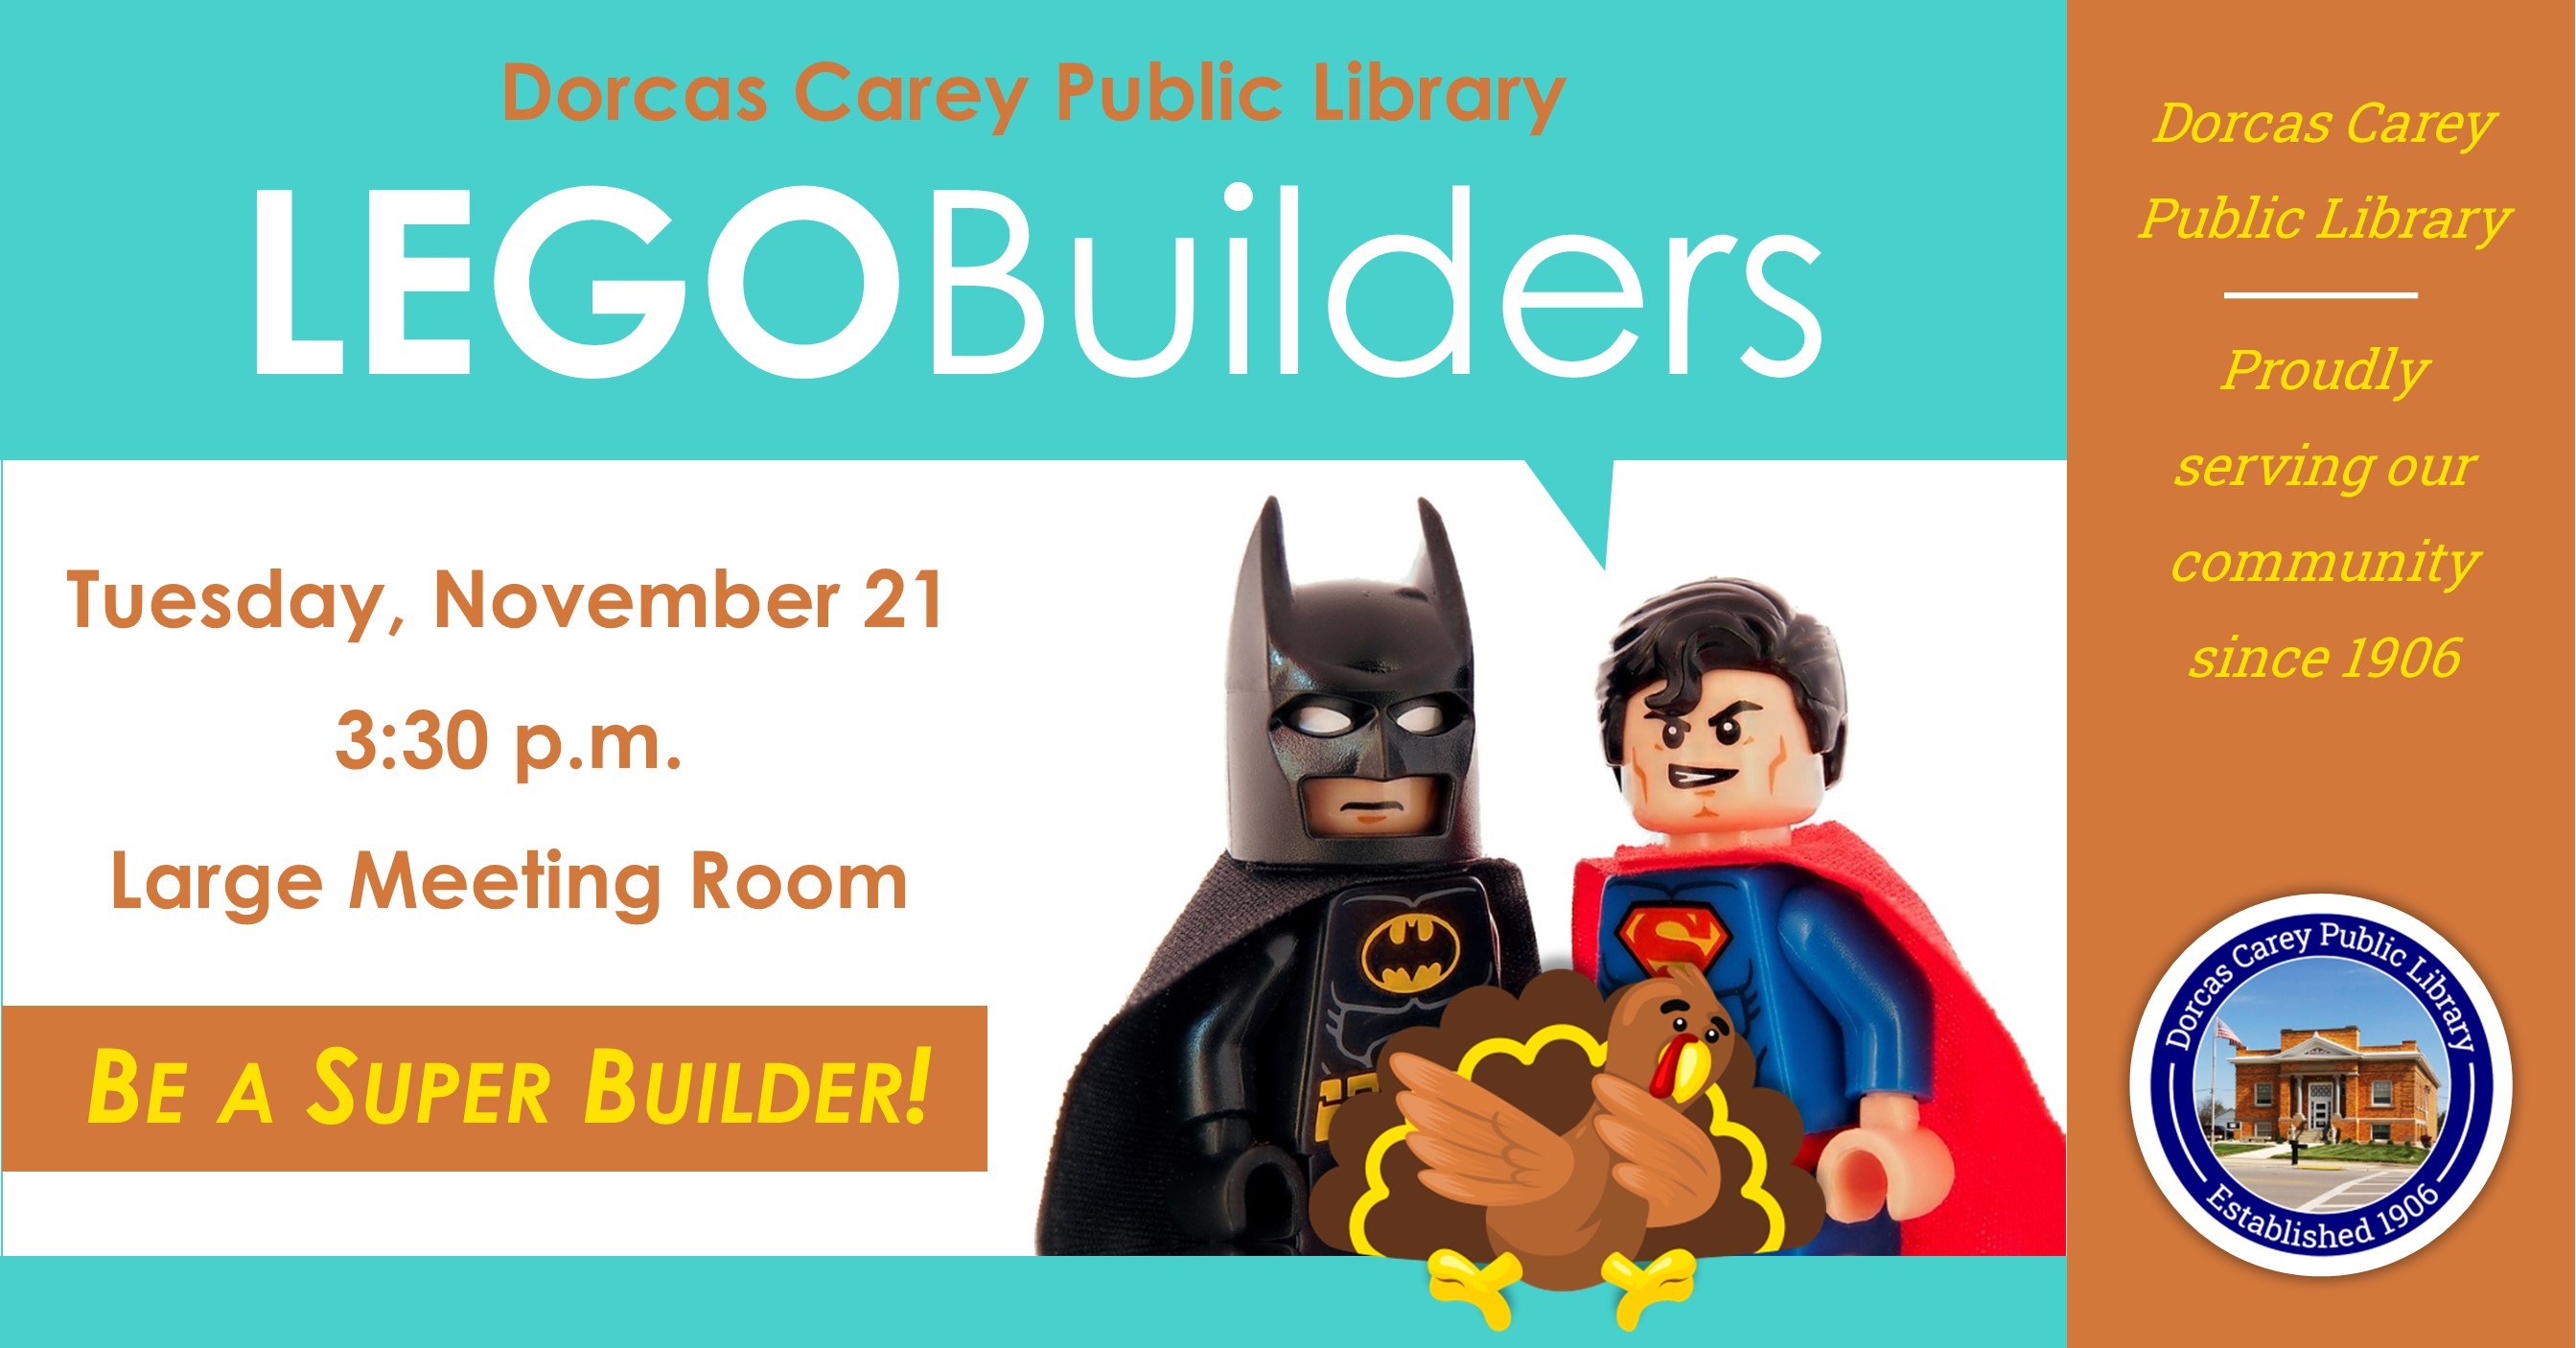 Do you love LEGOs?  Patrons of all ages can go wild building on the 3rd Tuesday of every month at 3:30 p.m., September through May.